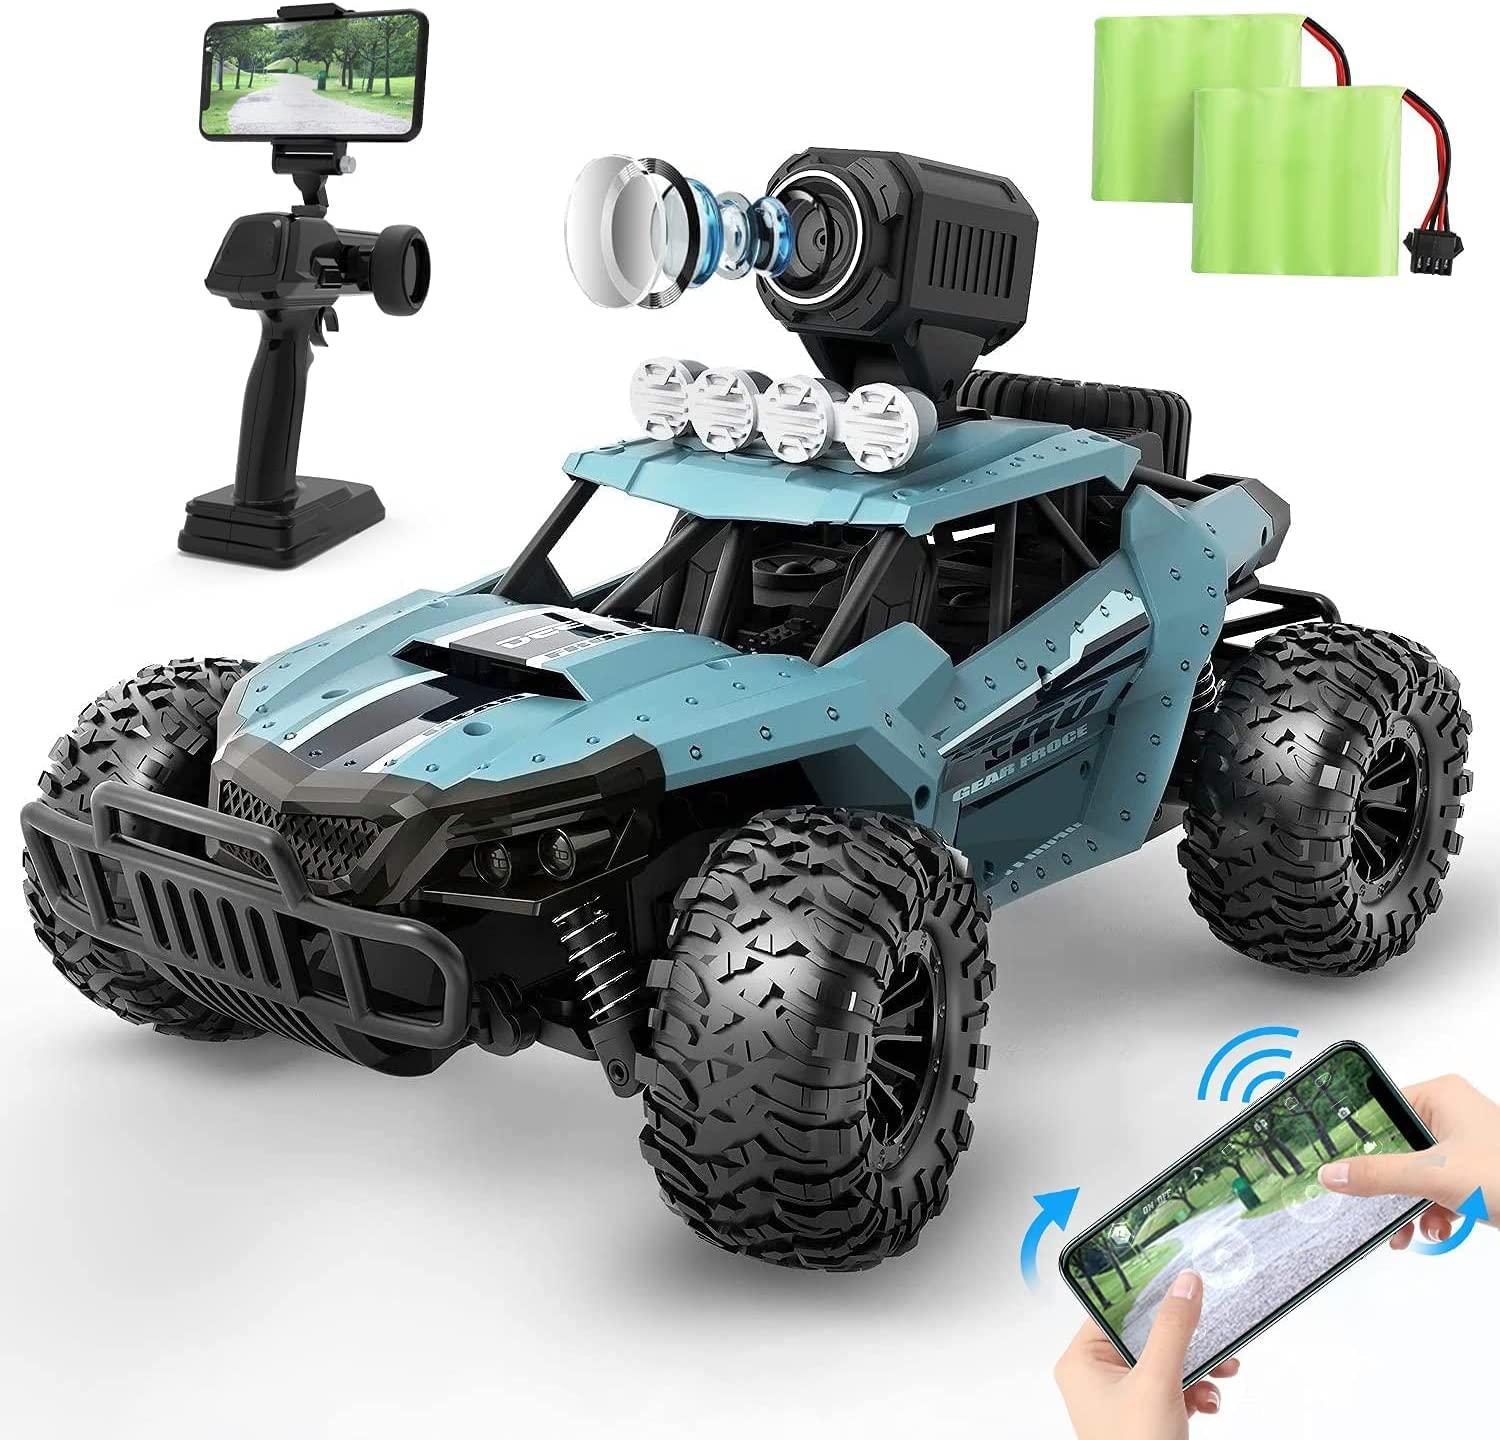 Electric Car Toy Remote Control: Enhance Your Playtime with an Electric Car Toy Remote Control